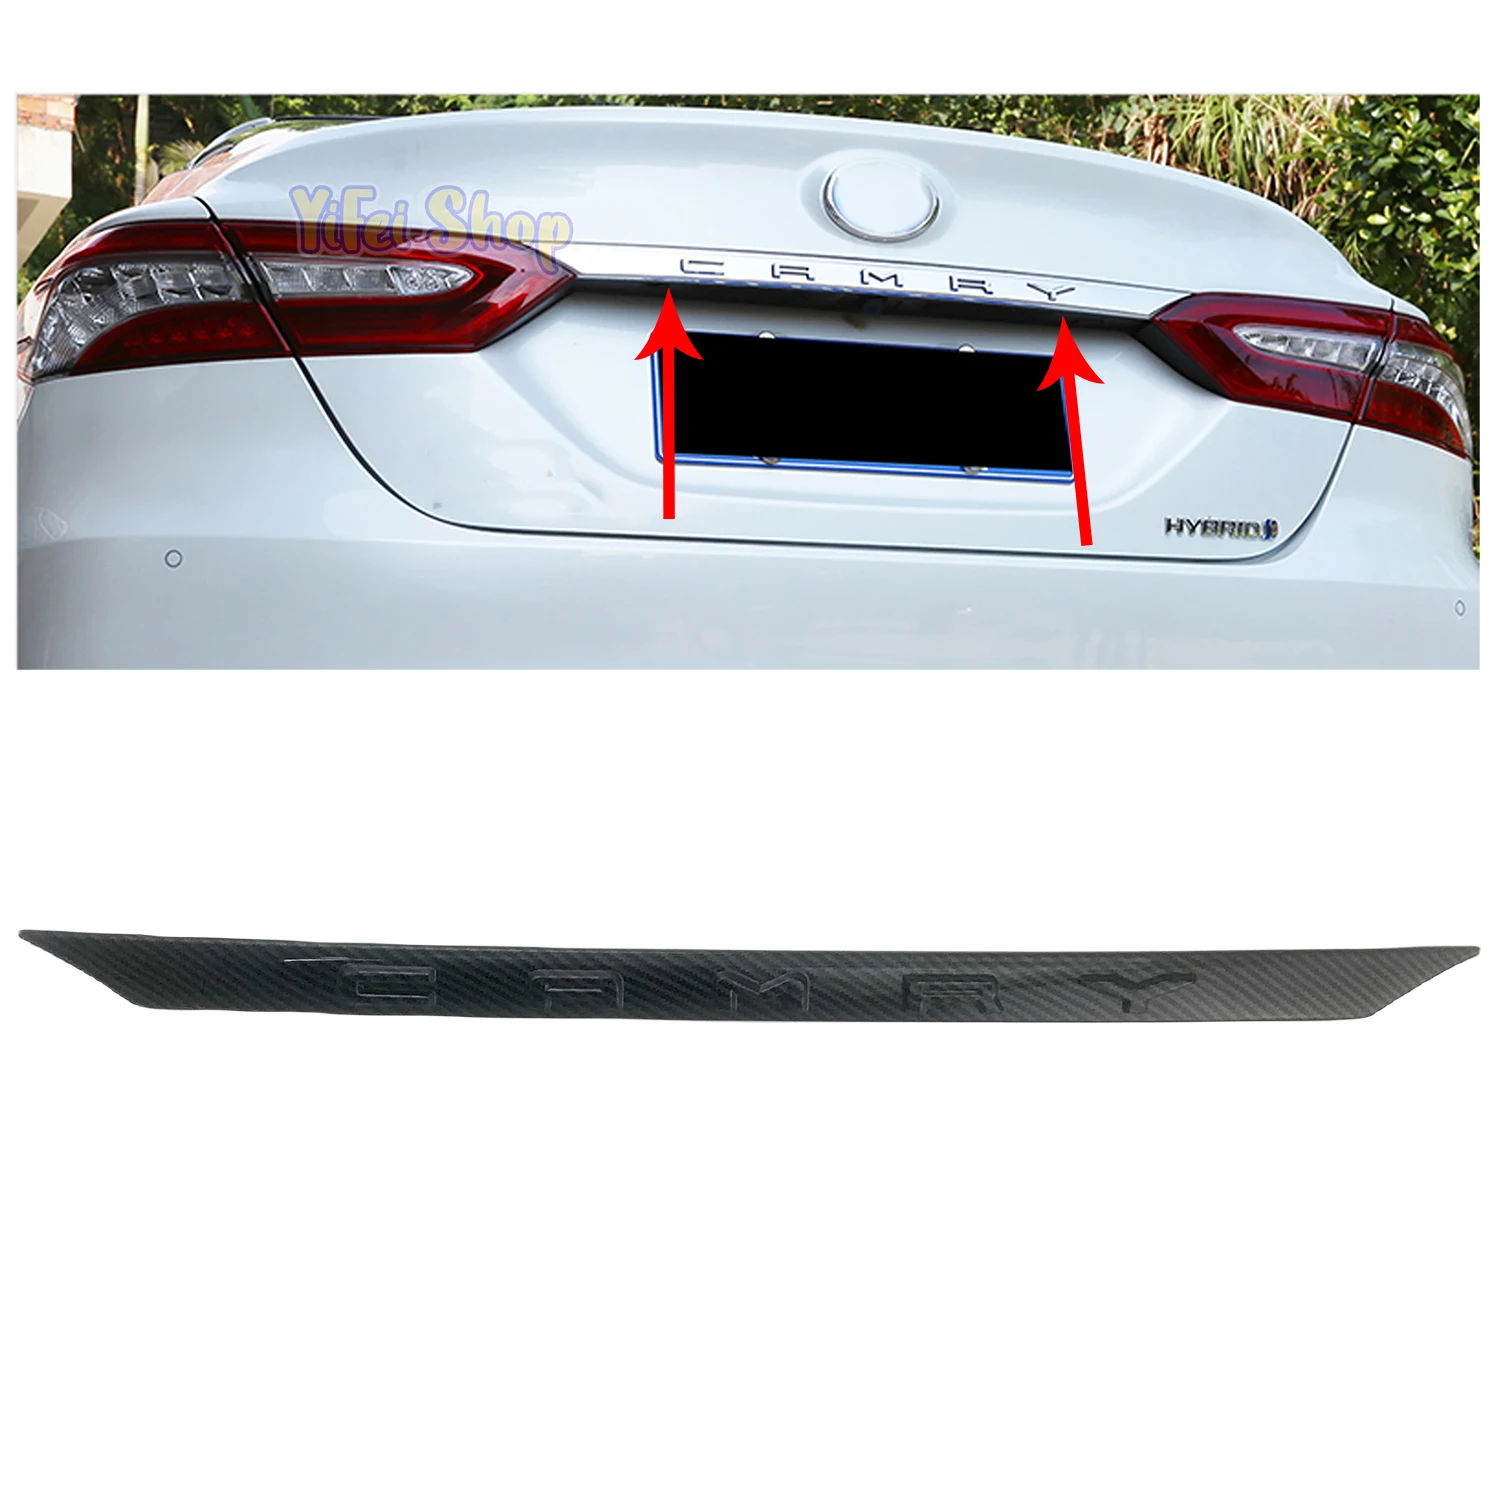 

1pcs New Paste Style Car ABS Chrome Carbon Accessories Plated Rear Trunk Lid Cover Trim 2018 2019 2020 For Toyota Camry 8